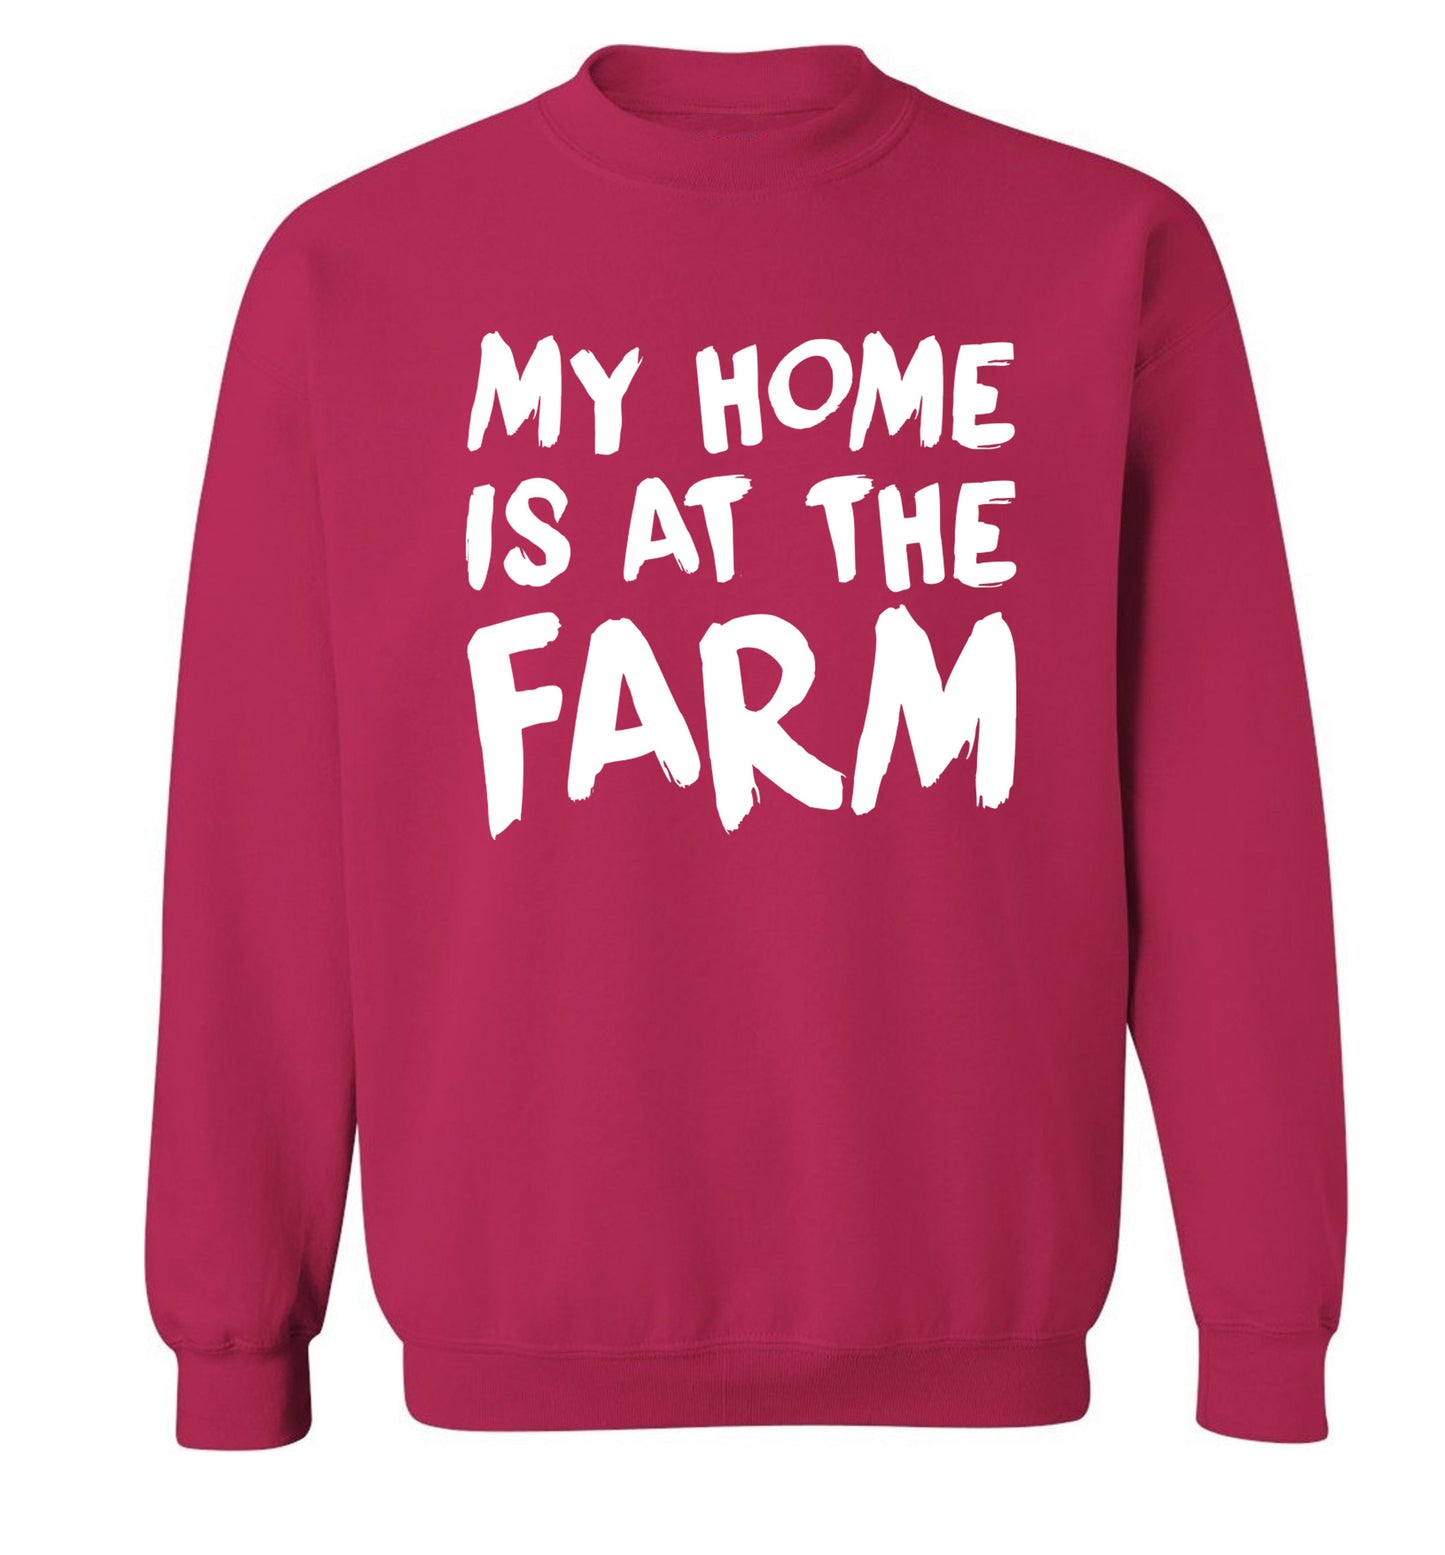 My home is at the farm Adult's unisex pink Sweater 2XL